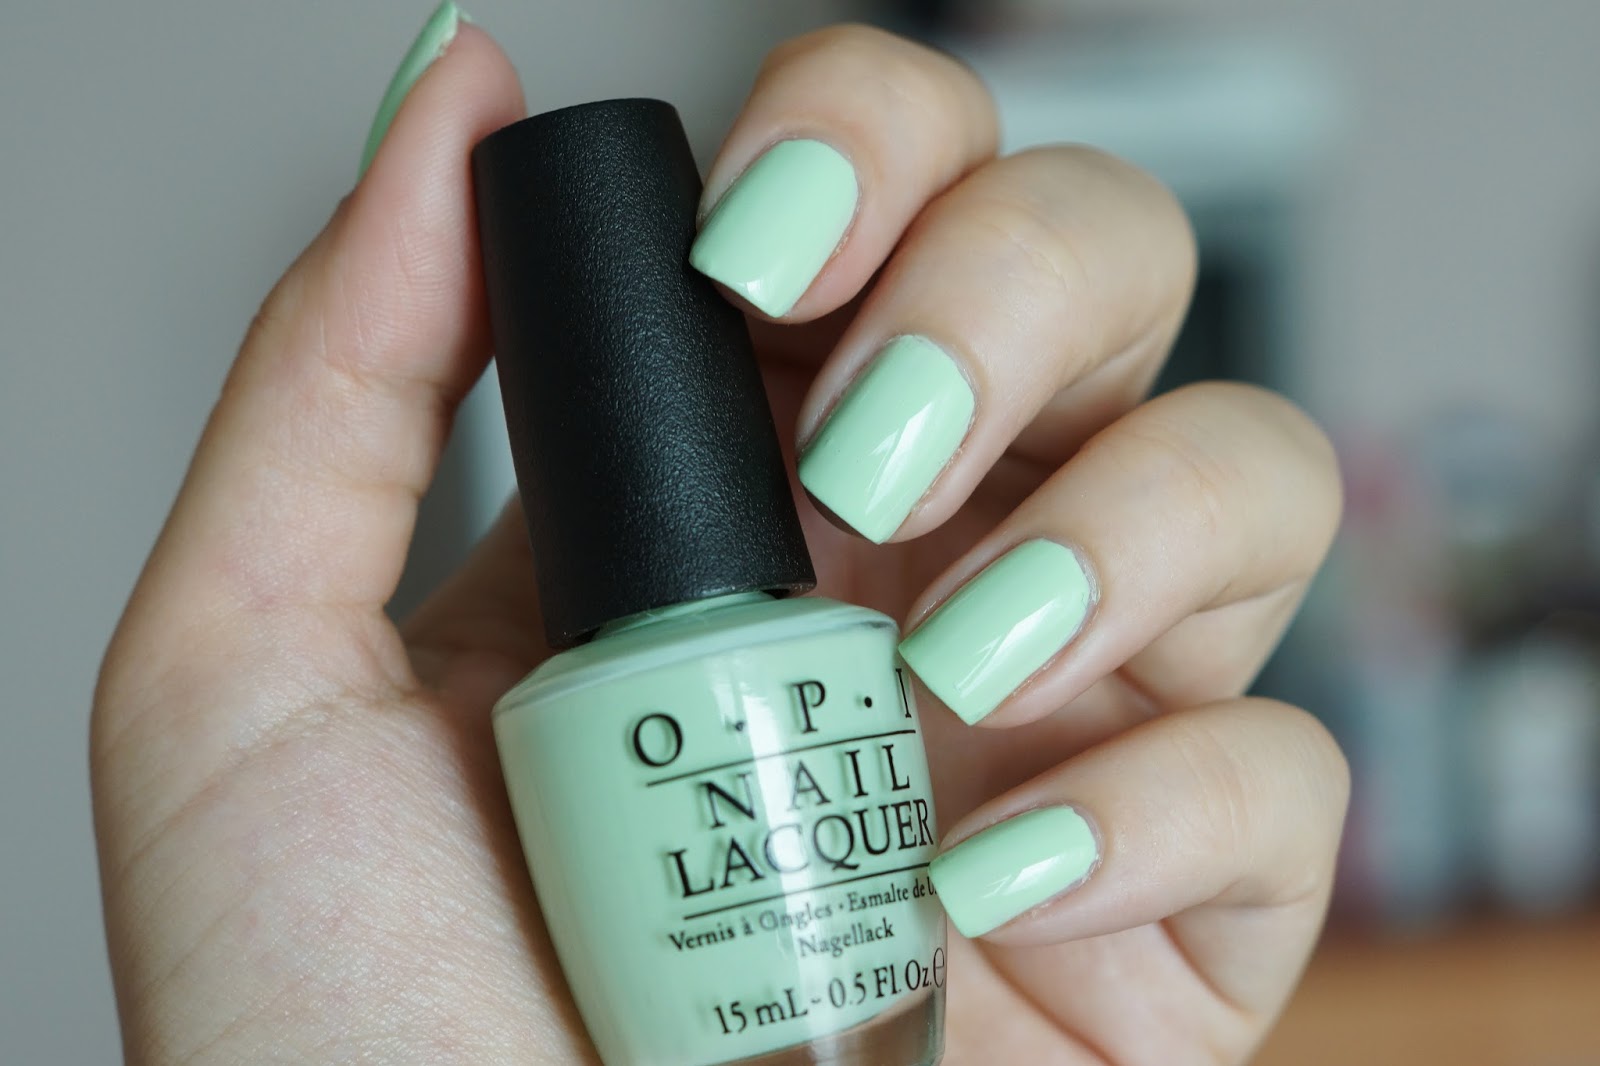 1. OPI Nail Lacquer in "That's Hula-rious!" - wide 3